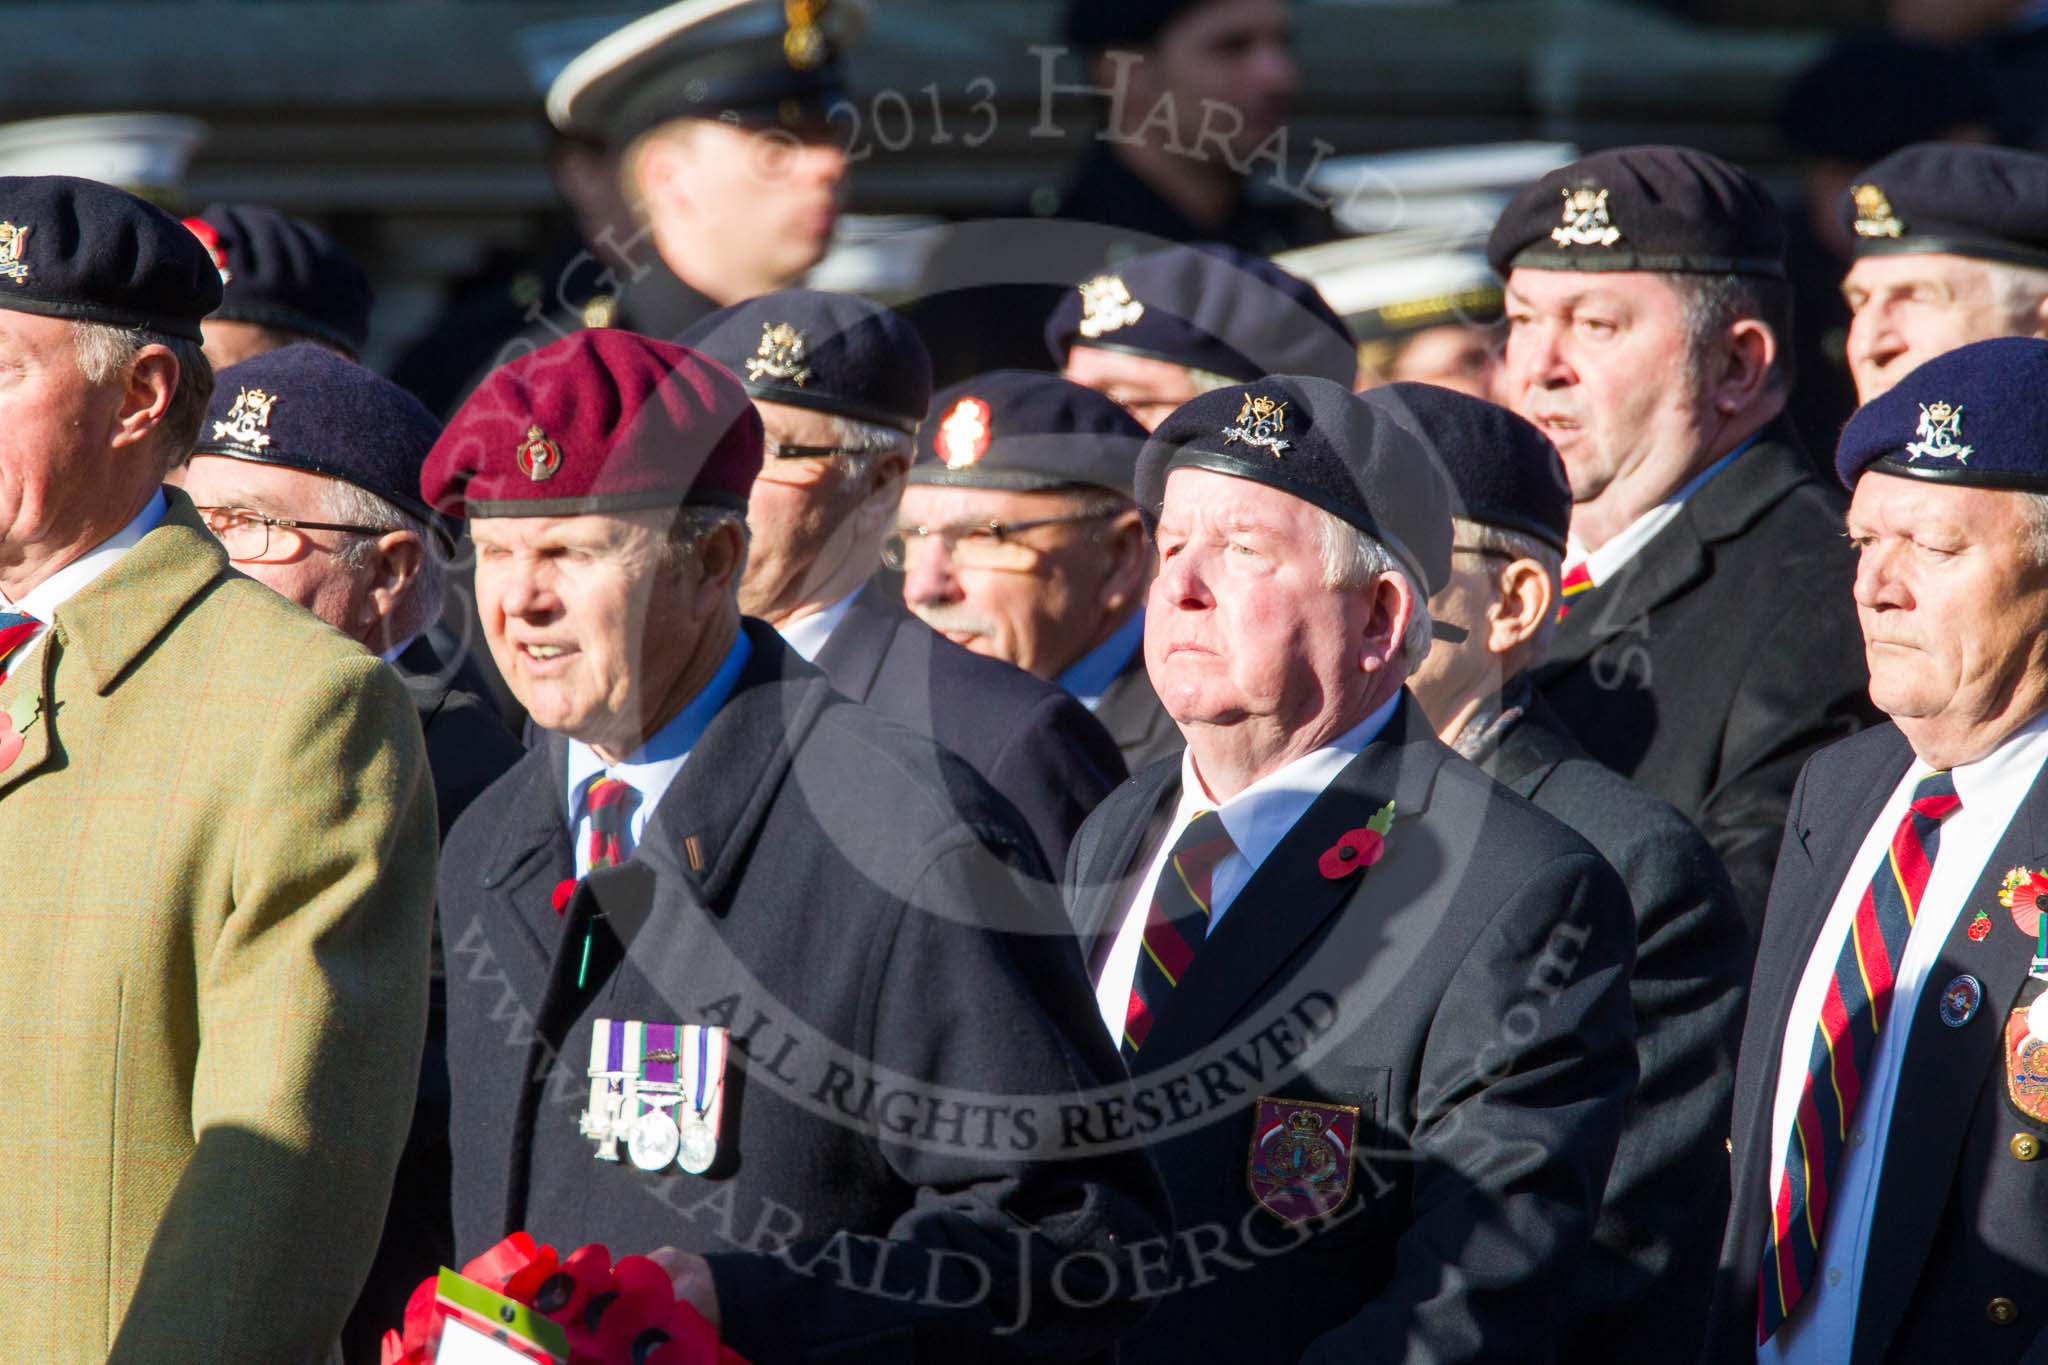 Remembrance Sunday at the Cenotaph in London 2014: Group B30 - 16/5th Queen's Royal Lancers.
Press stand opposite the Foreign Office building, Whitehall, London SW1,
London,
Greater London,
United Kingdom,
on 09 November 2014 at 12:13, image #1883